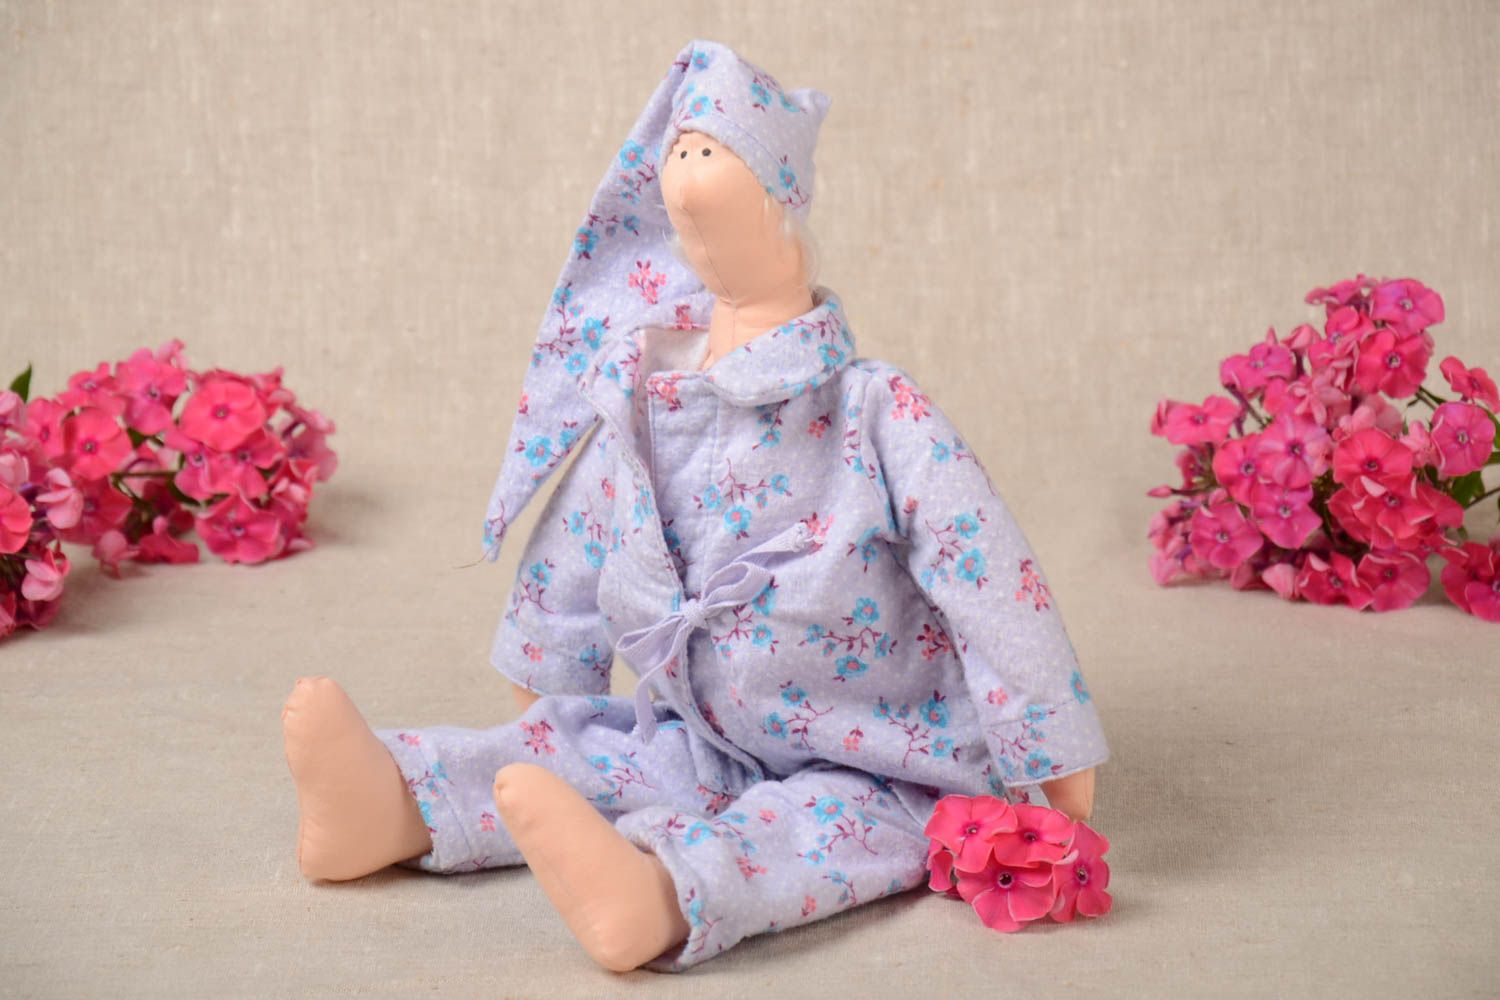 Beautiful handmade textile soft toy rag doll designs stuffed toy home designs photo 1